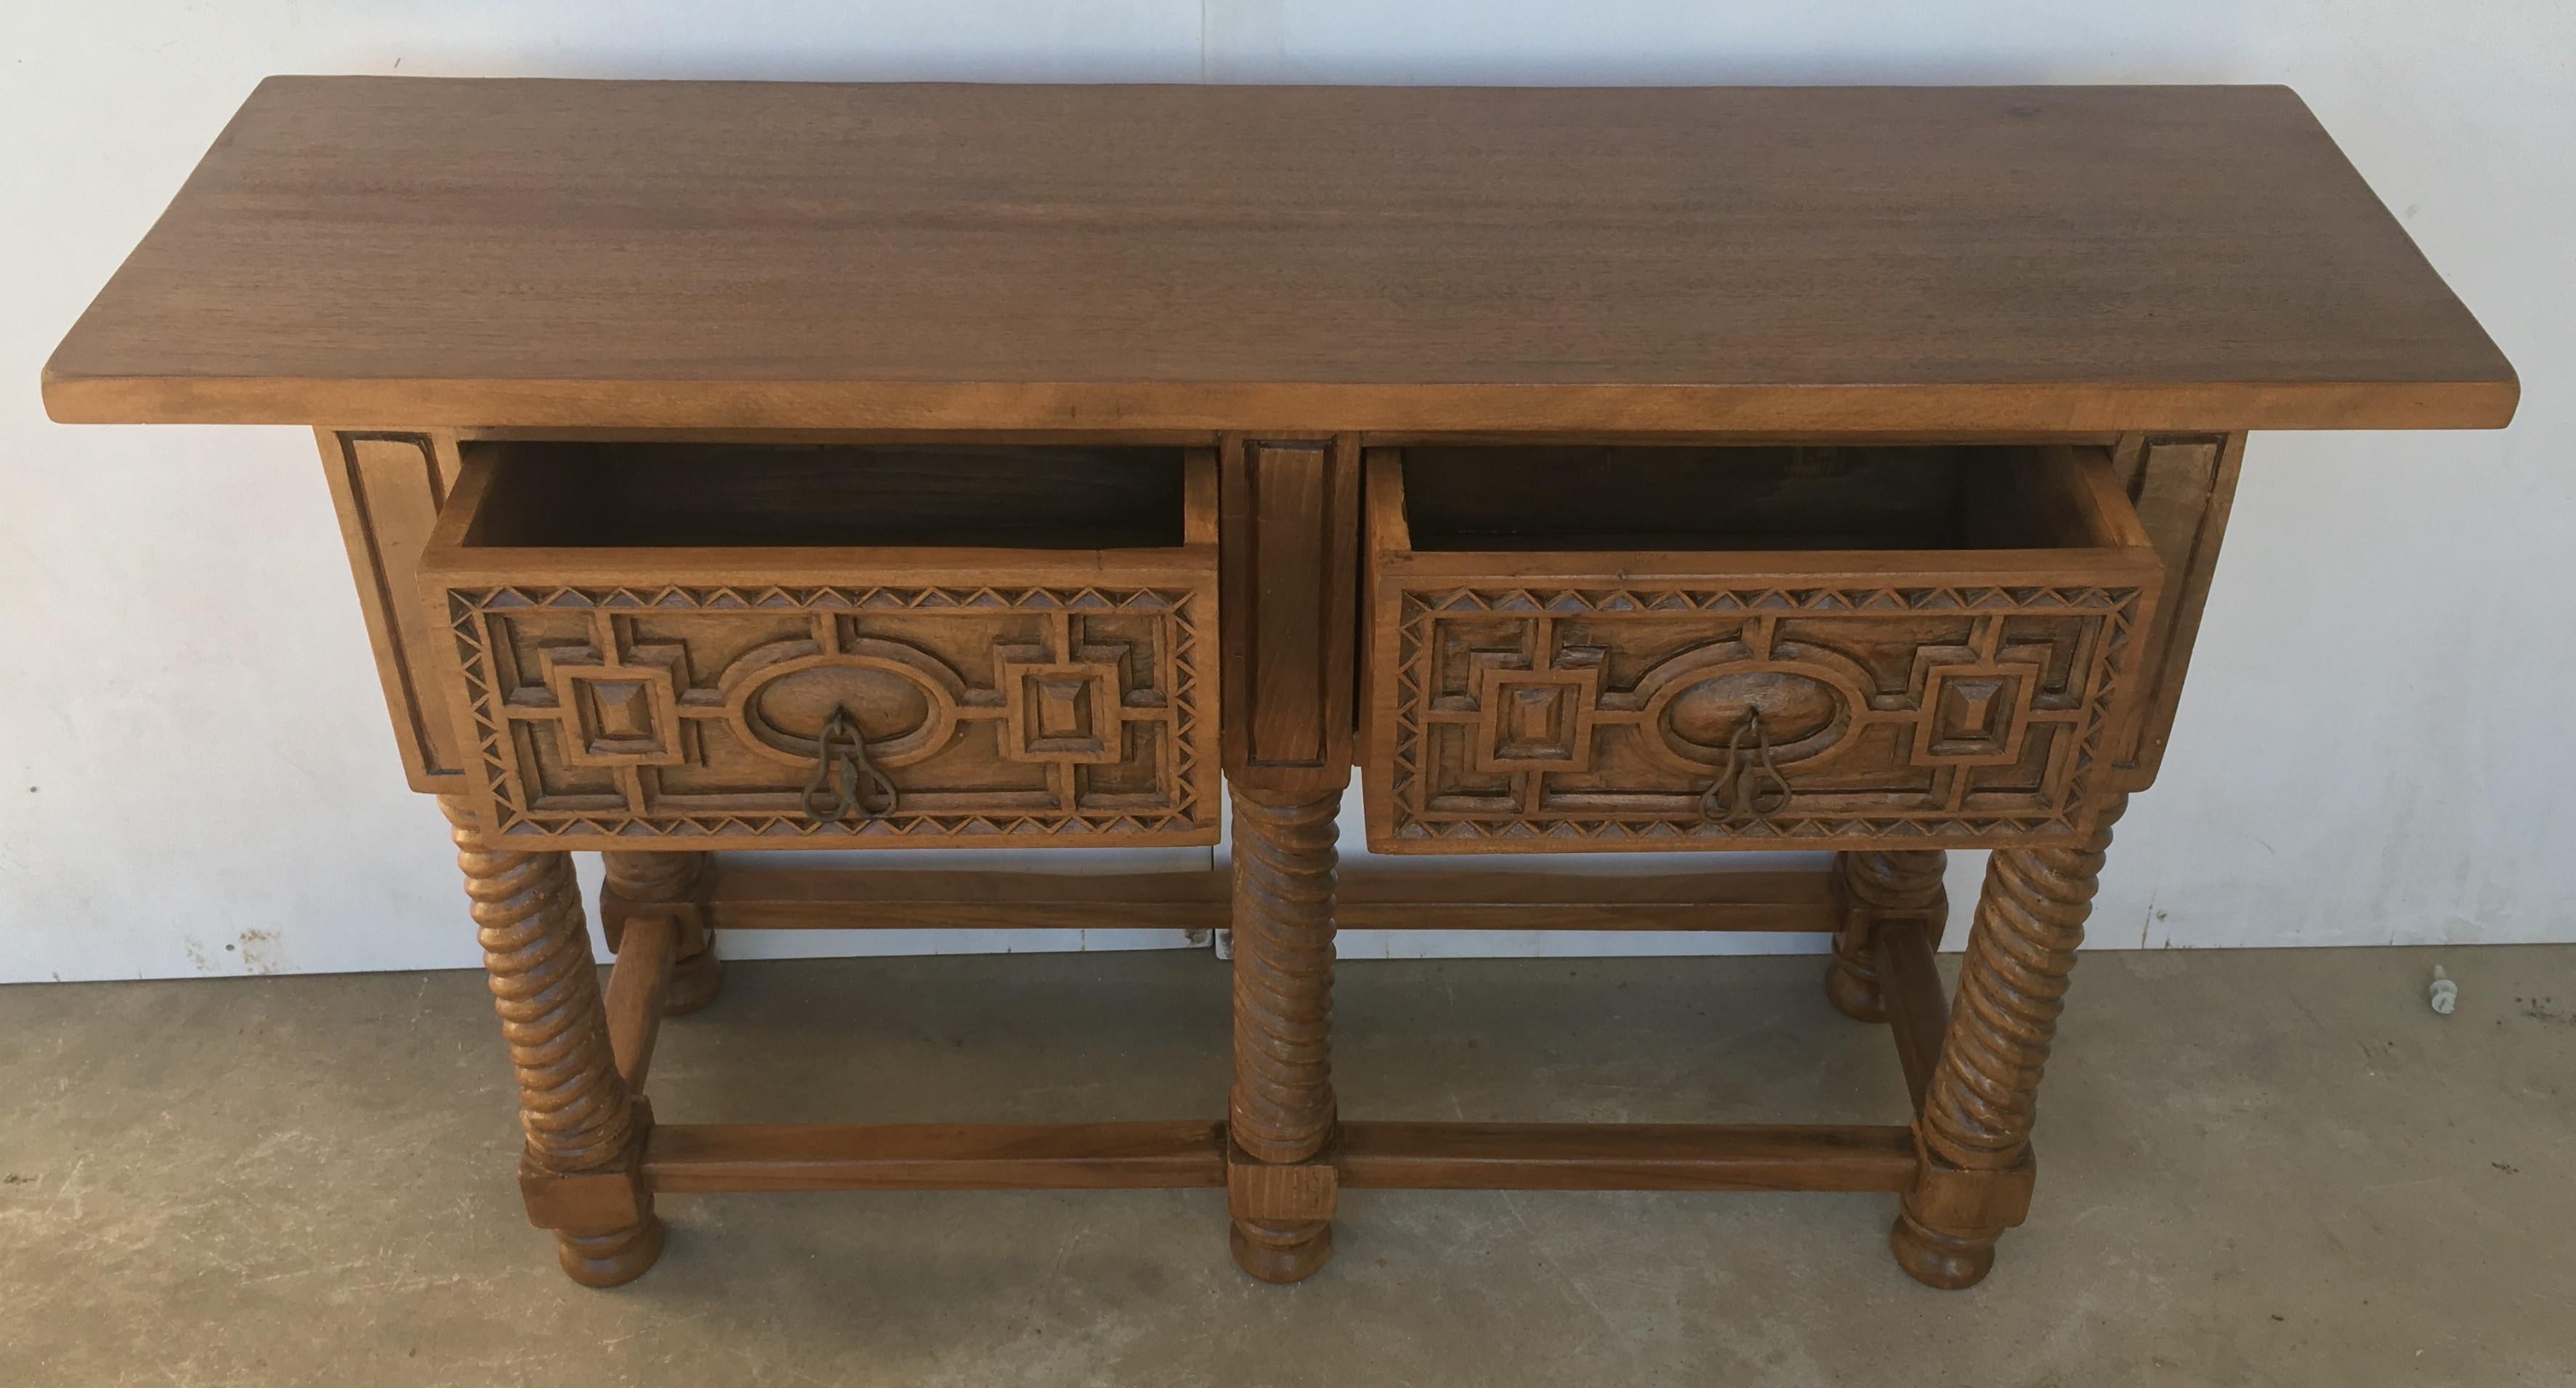 Early 19th Century Carved Walnut Wood Catalan Spanish Console Table (Eisen)